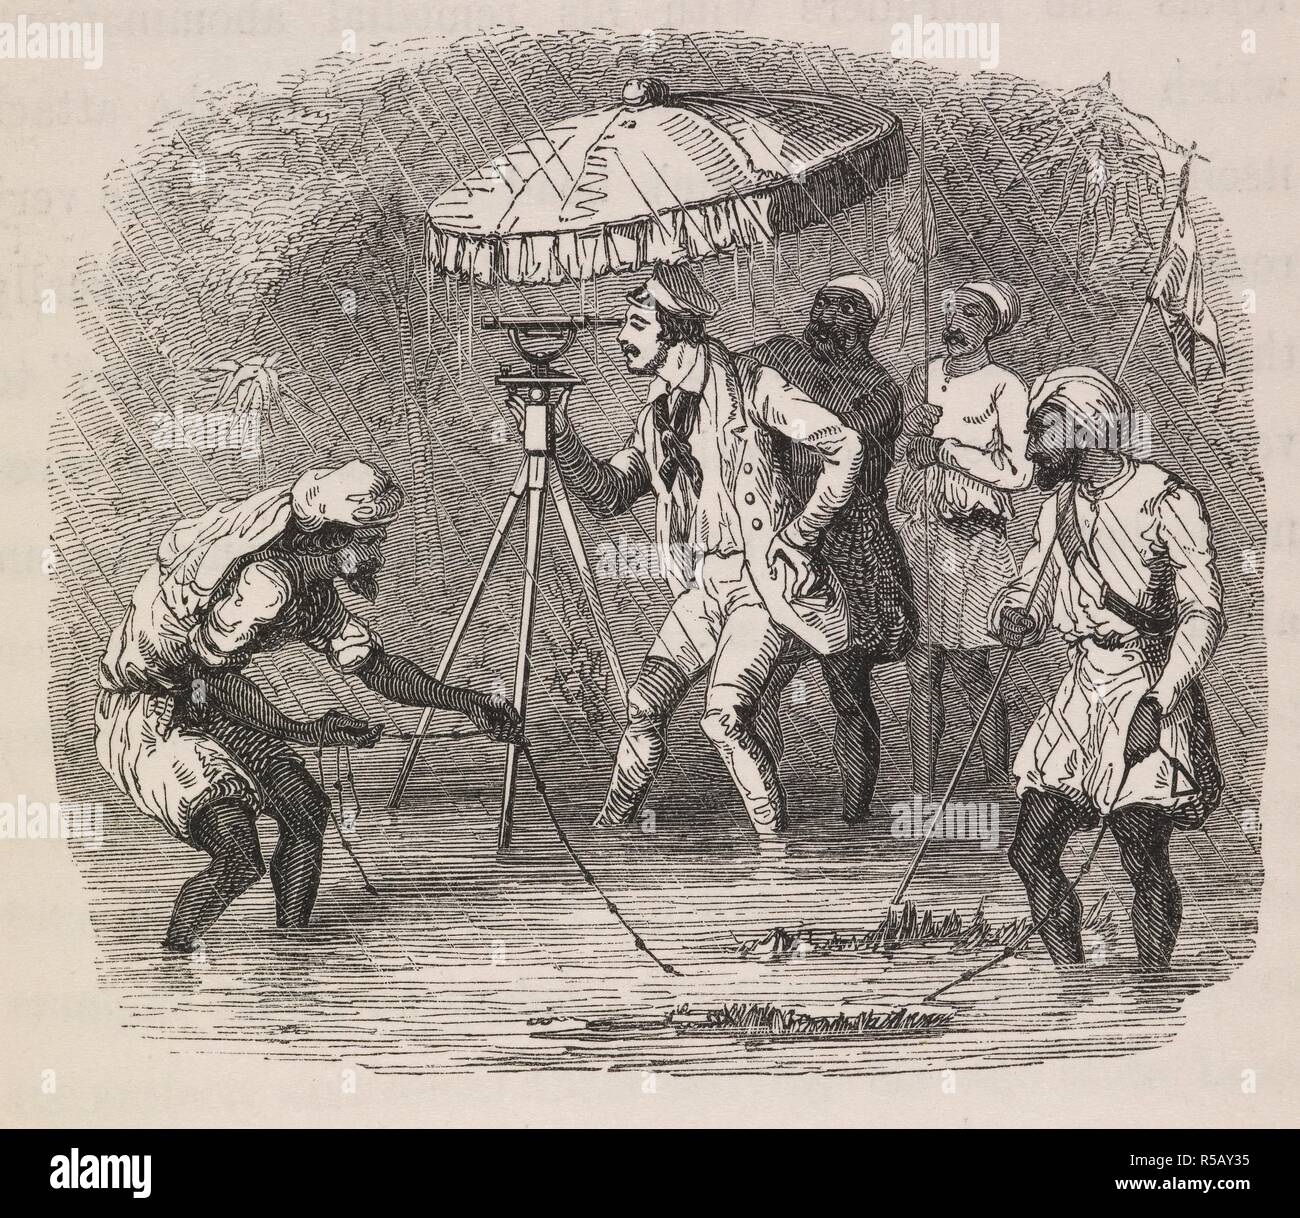 European man, under cover from the rain, using a piece of surveying equipment, aided by four Asian men. Pictures from the North in pen and pencil, sketched during a summer ramble. London, England John Ollivier, 1848. Source: V.10130 page 119. Language: English. Author: Atkinson, George Francklin. Stock Photo